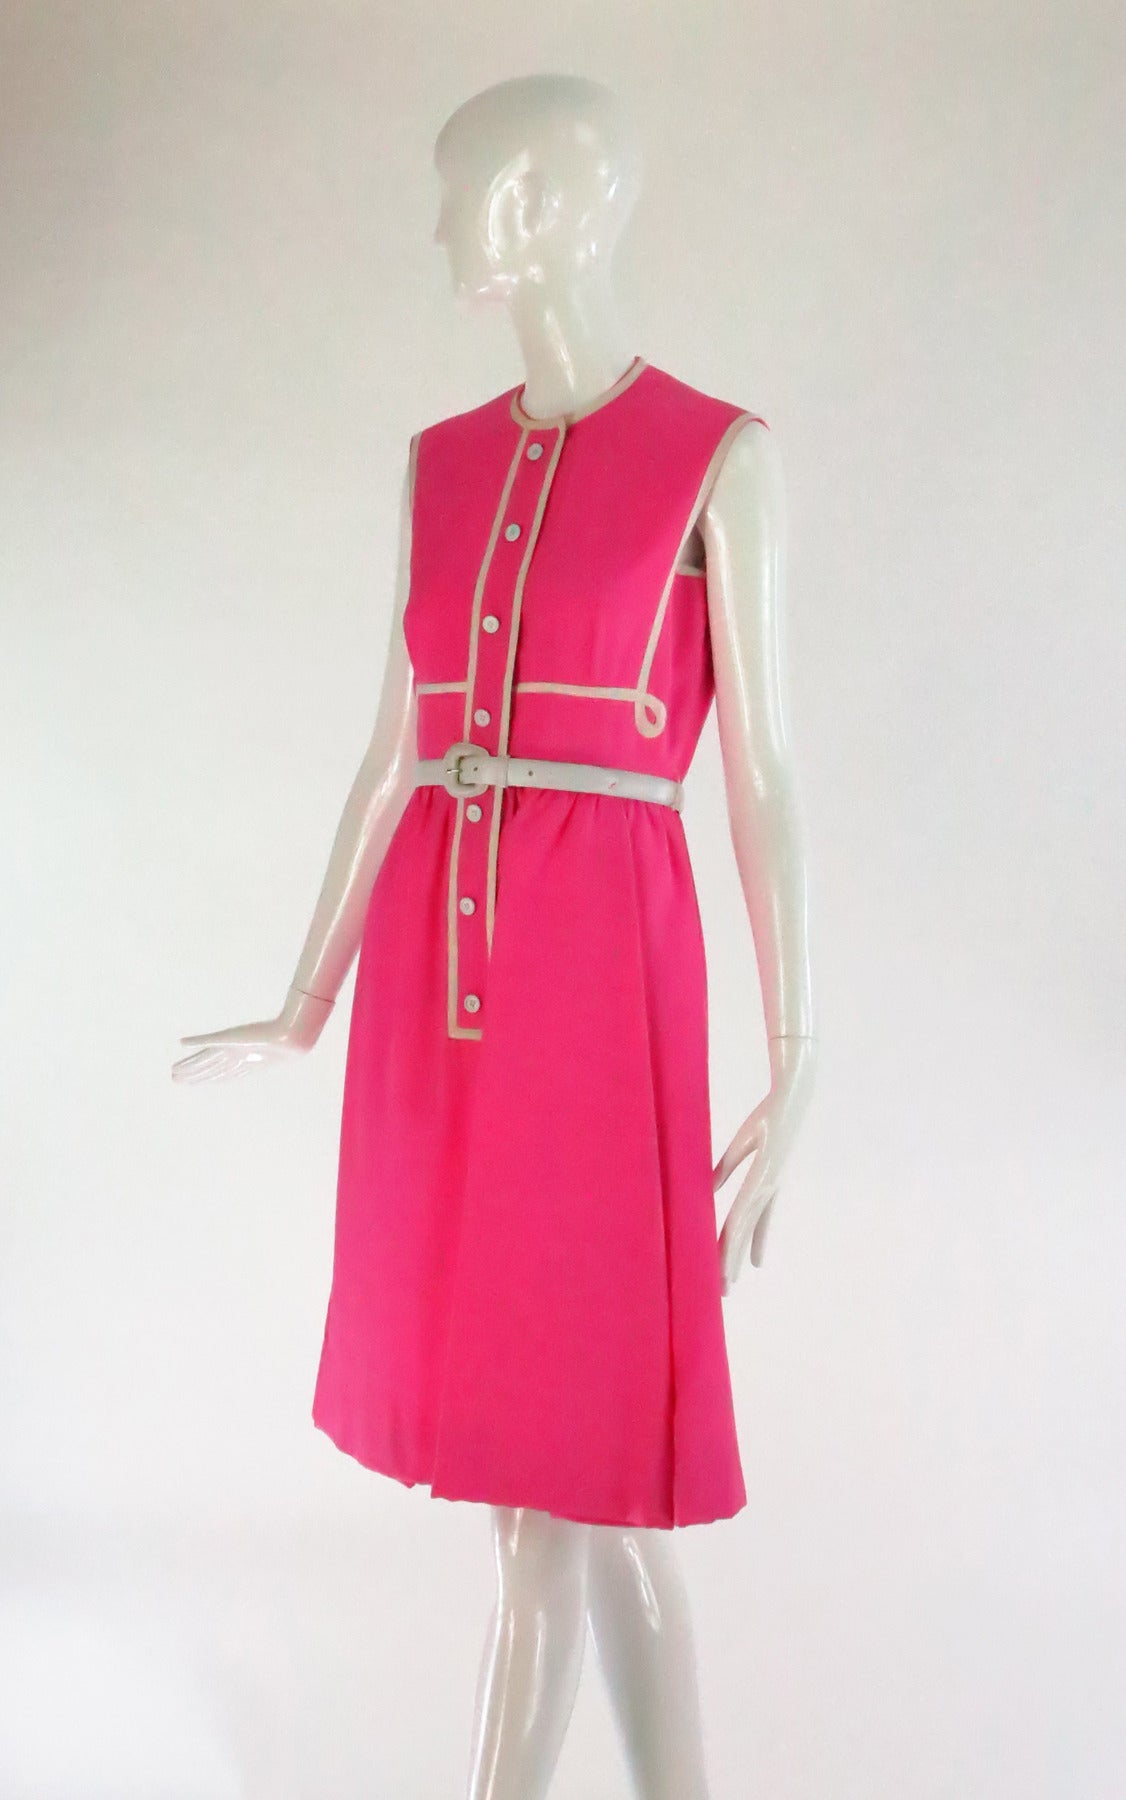 Geoffrey Beene pink & white linen sleeveless dress...The dress has white cord detail at the bodice, there is a placket with decorative buttons that conceals the hidden zipper...The skirt is softly gathered at the waist...Fully lined in pink